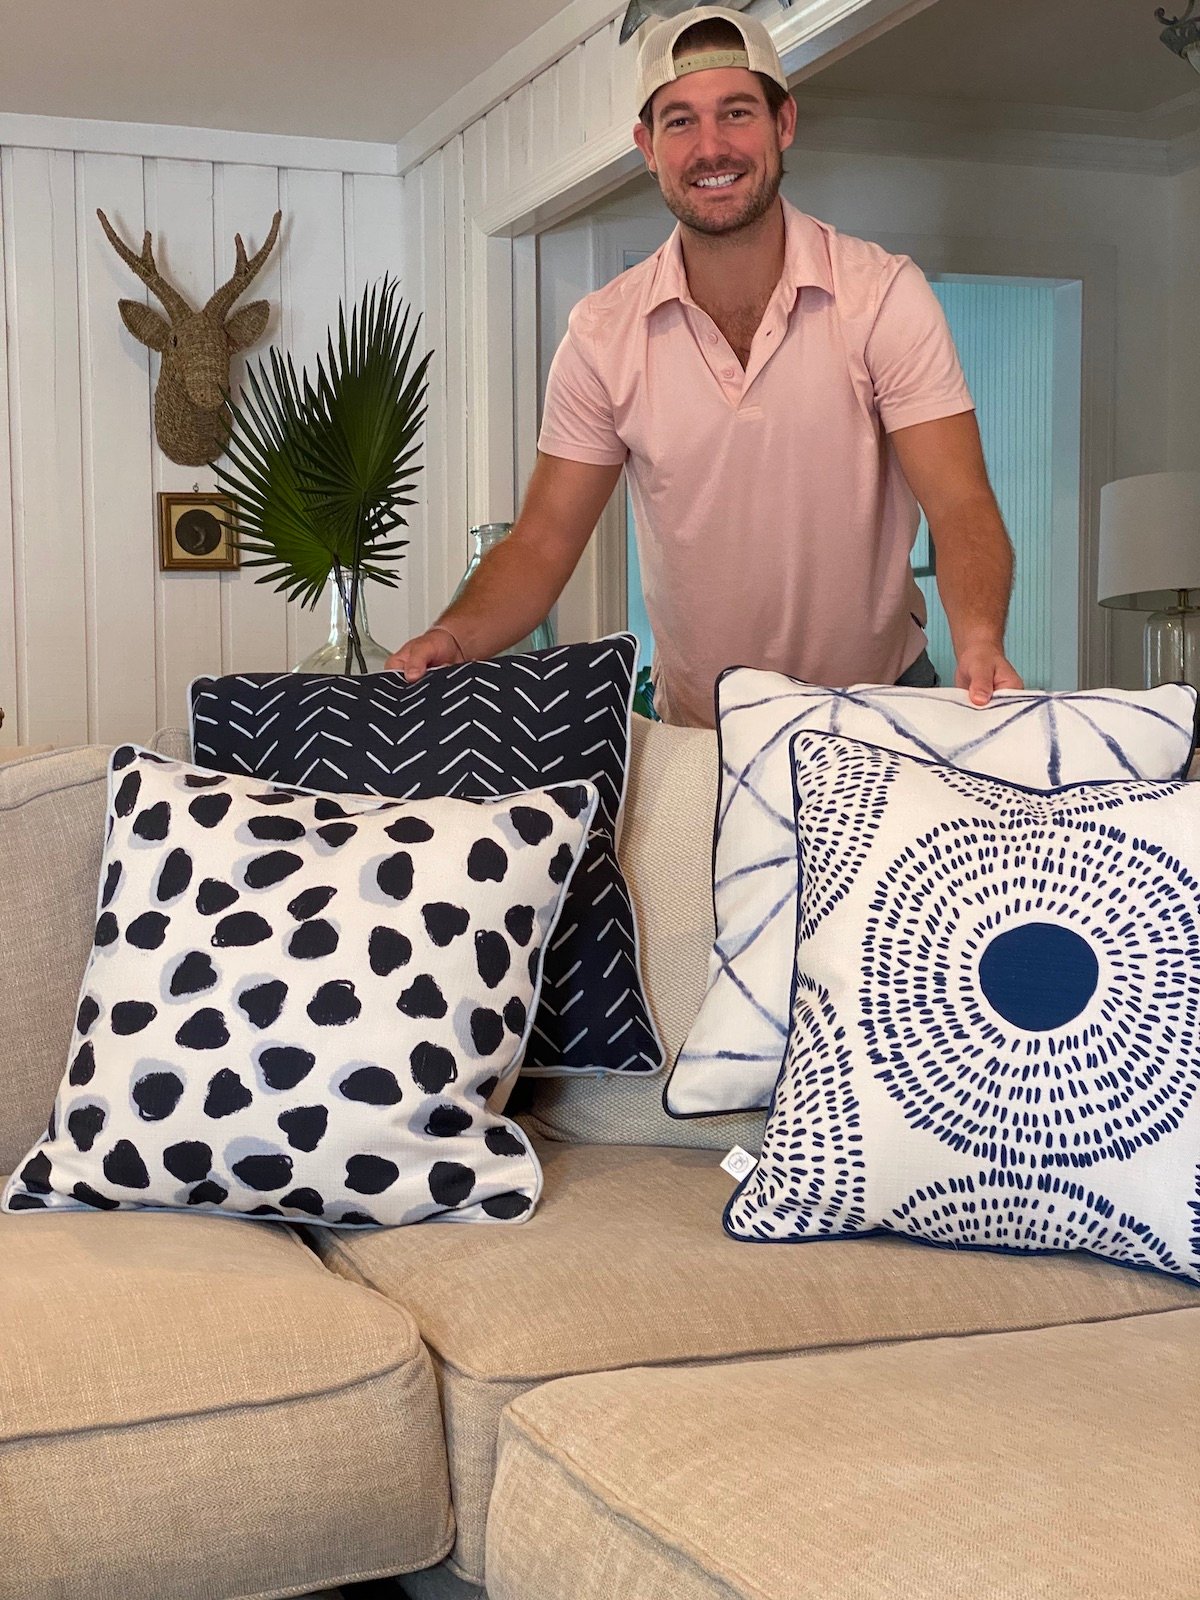 'Southern Charm' Craig Conover Gets the Last Laugh With Sewing Down South